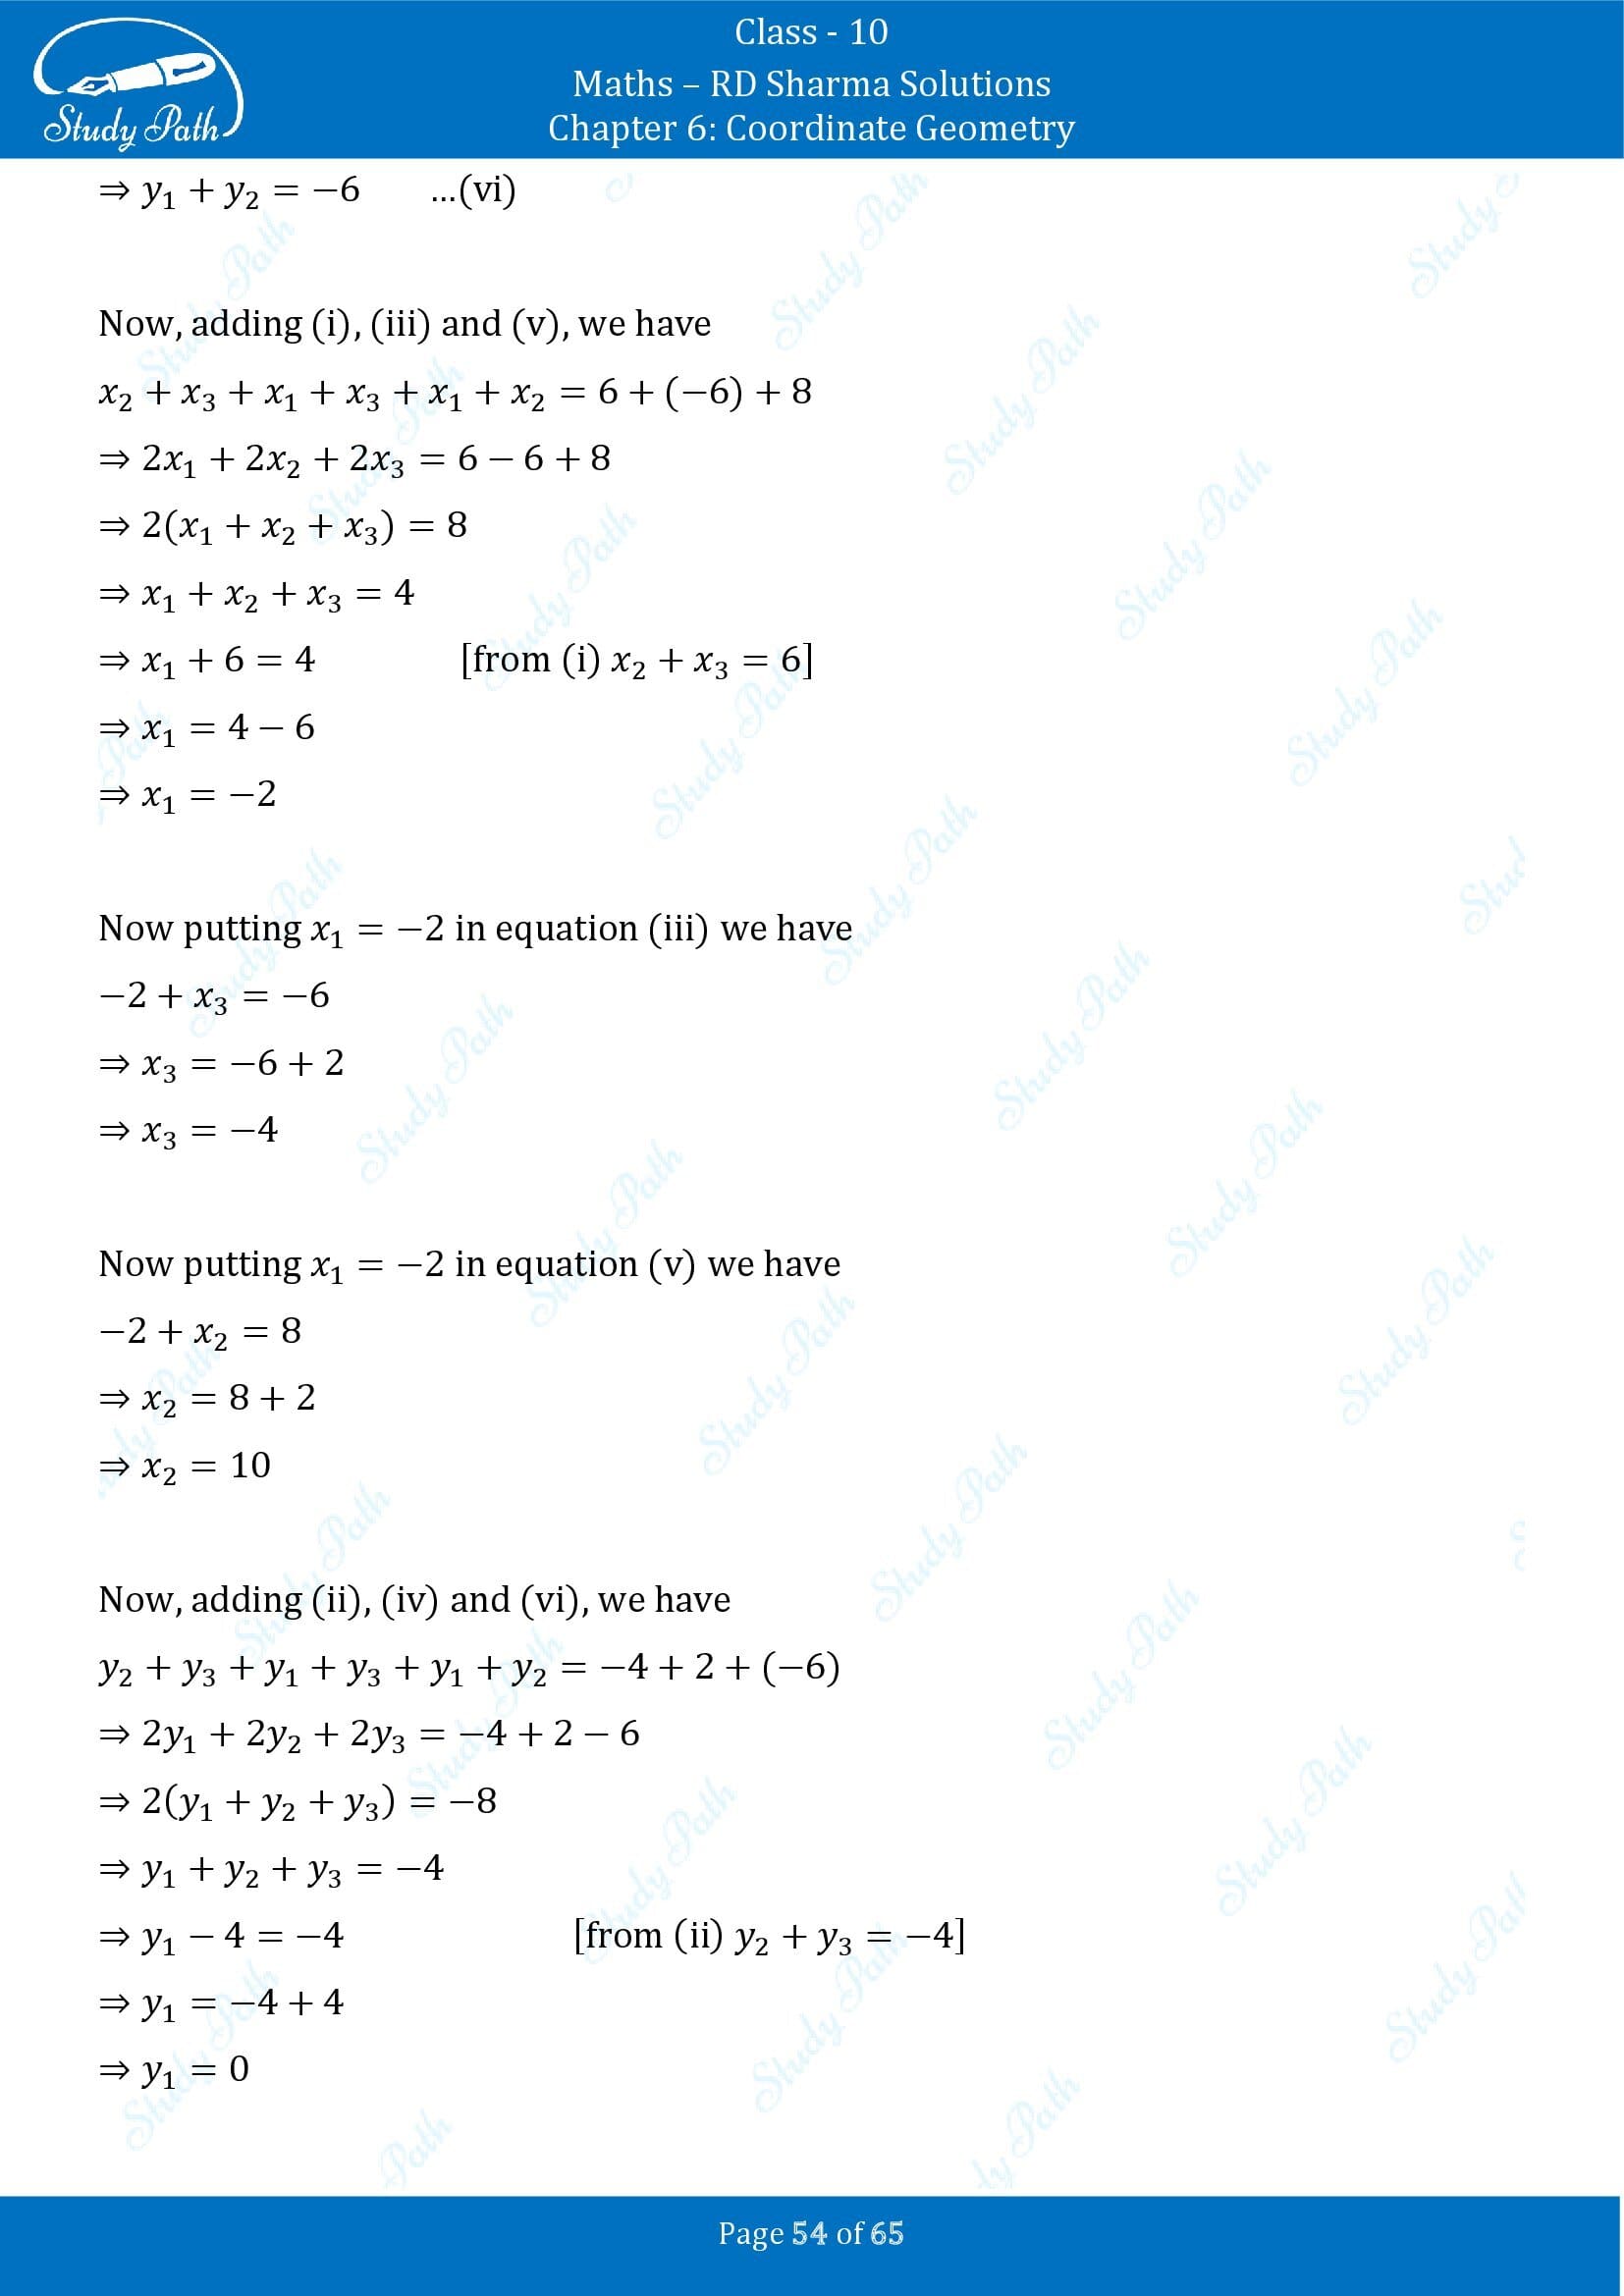 RD Sharma Solutions Class 10 Chapter 6 Coordinate Geometry Exercise 6.3 00054